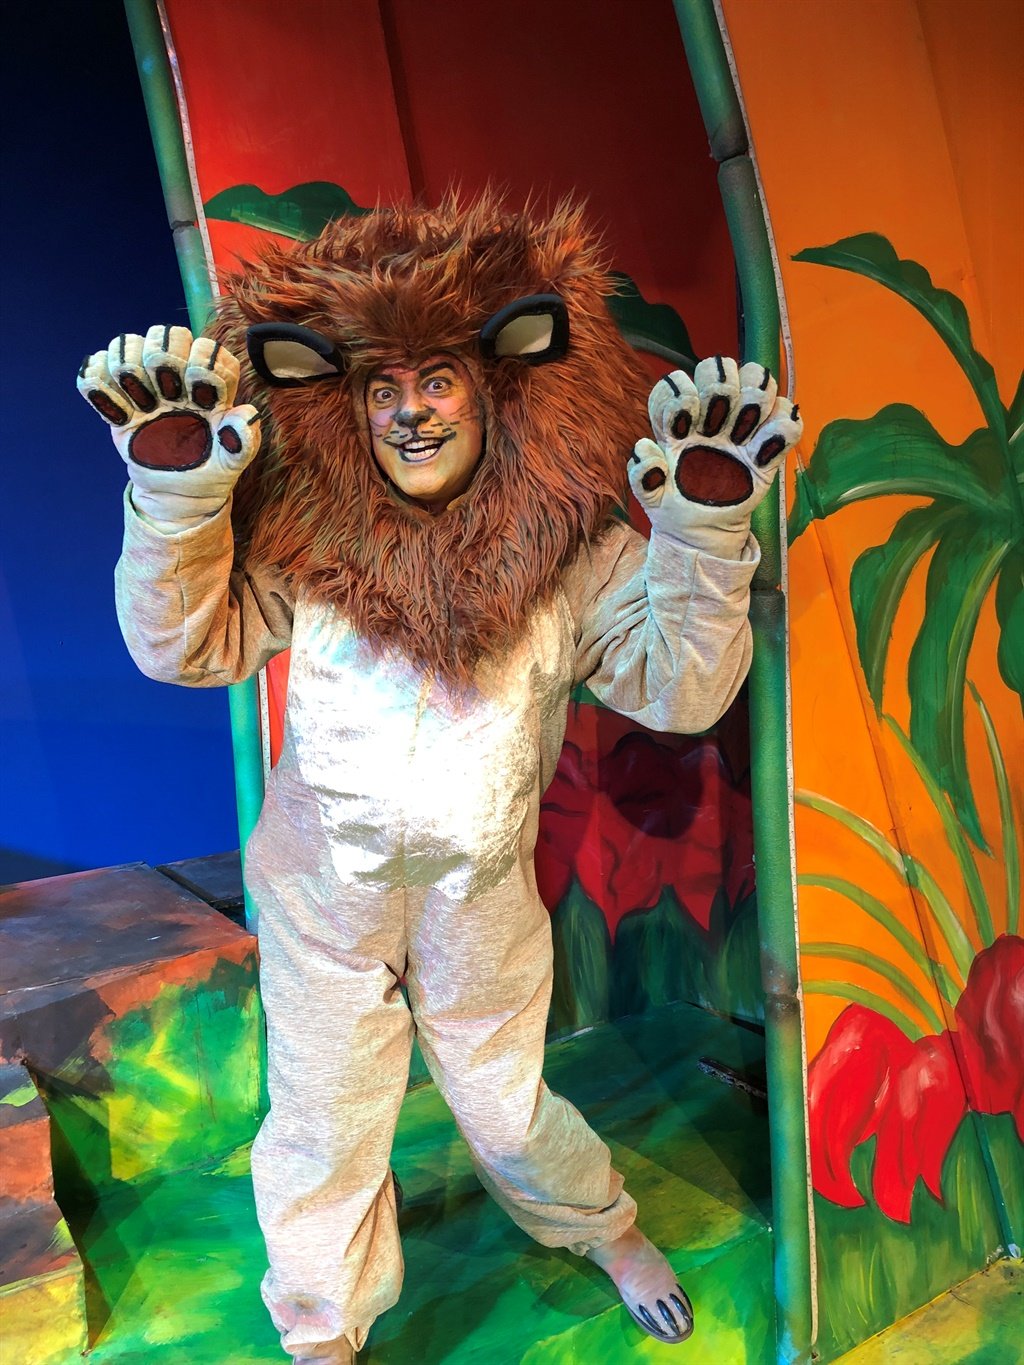 The four lead actors, Luciano Zappa (Alex the Lion), Joelle Rochecouste (Gloria the Hippo), Thokozani Jiyane (Marty the Zebra) and Marvin Molepo (Melman the Giraffe) ensure that they are on par with the original cast as they put on an interactive spectacle.